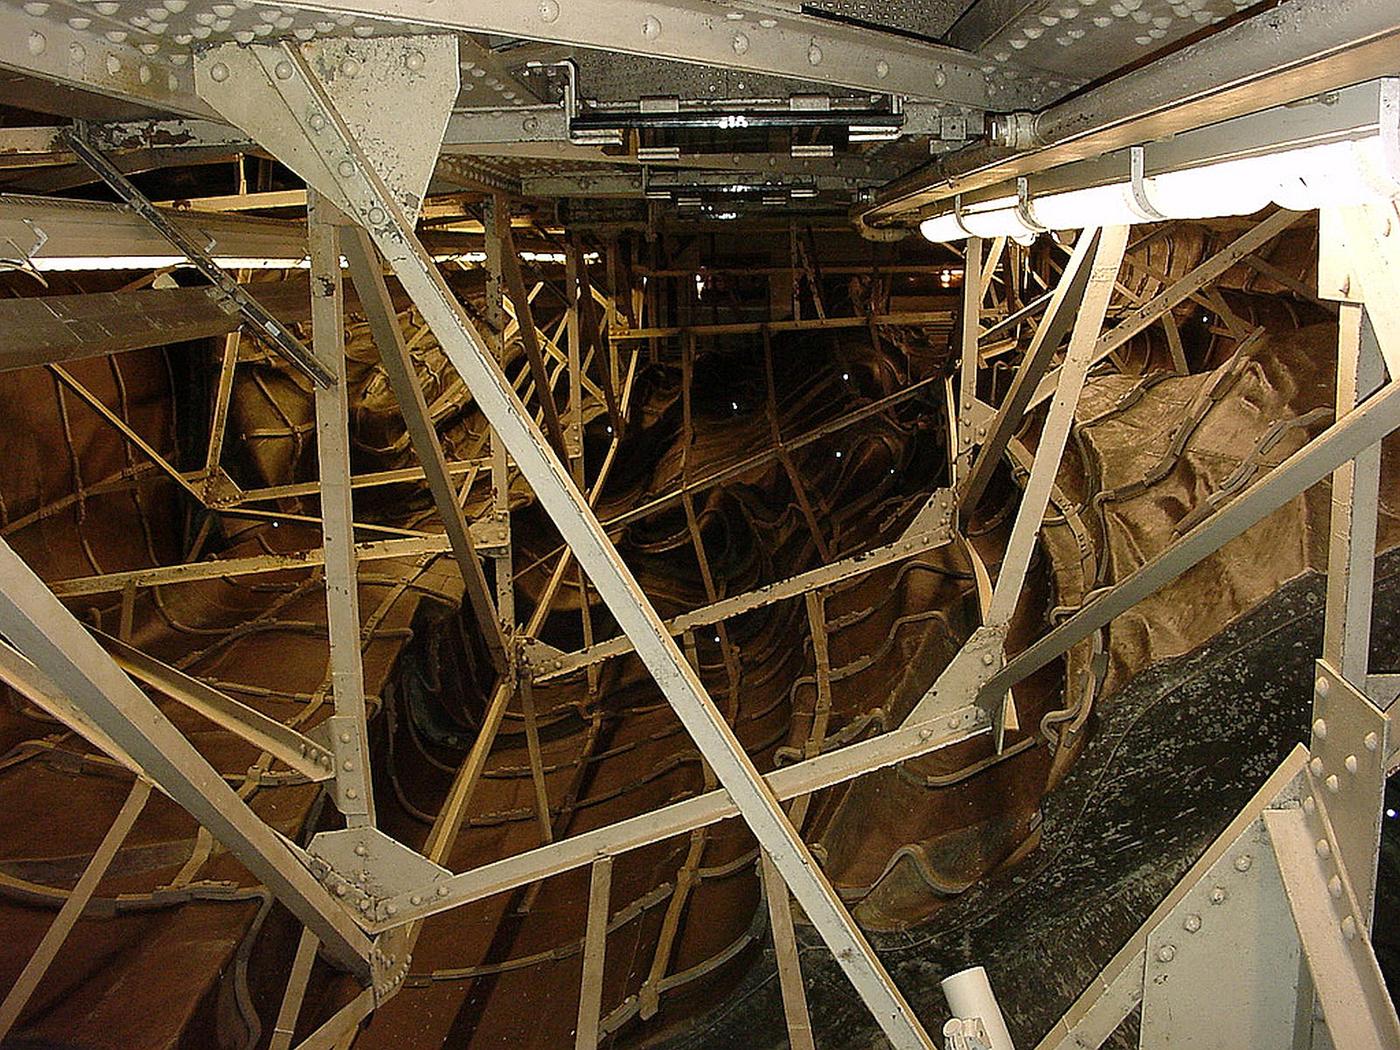 An interior shot of the Statue of Liberty's skirt showing corrosion on the iron framework and copper skin